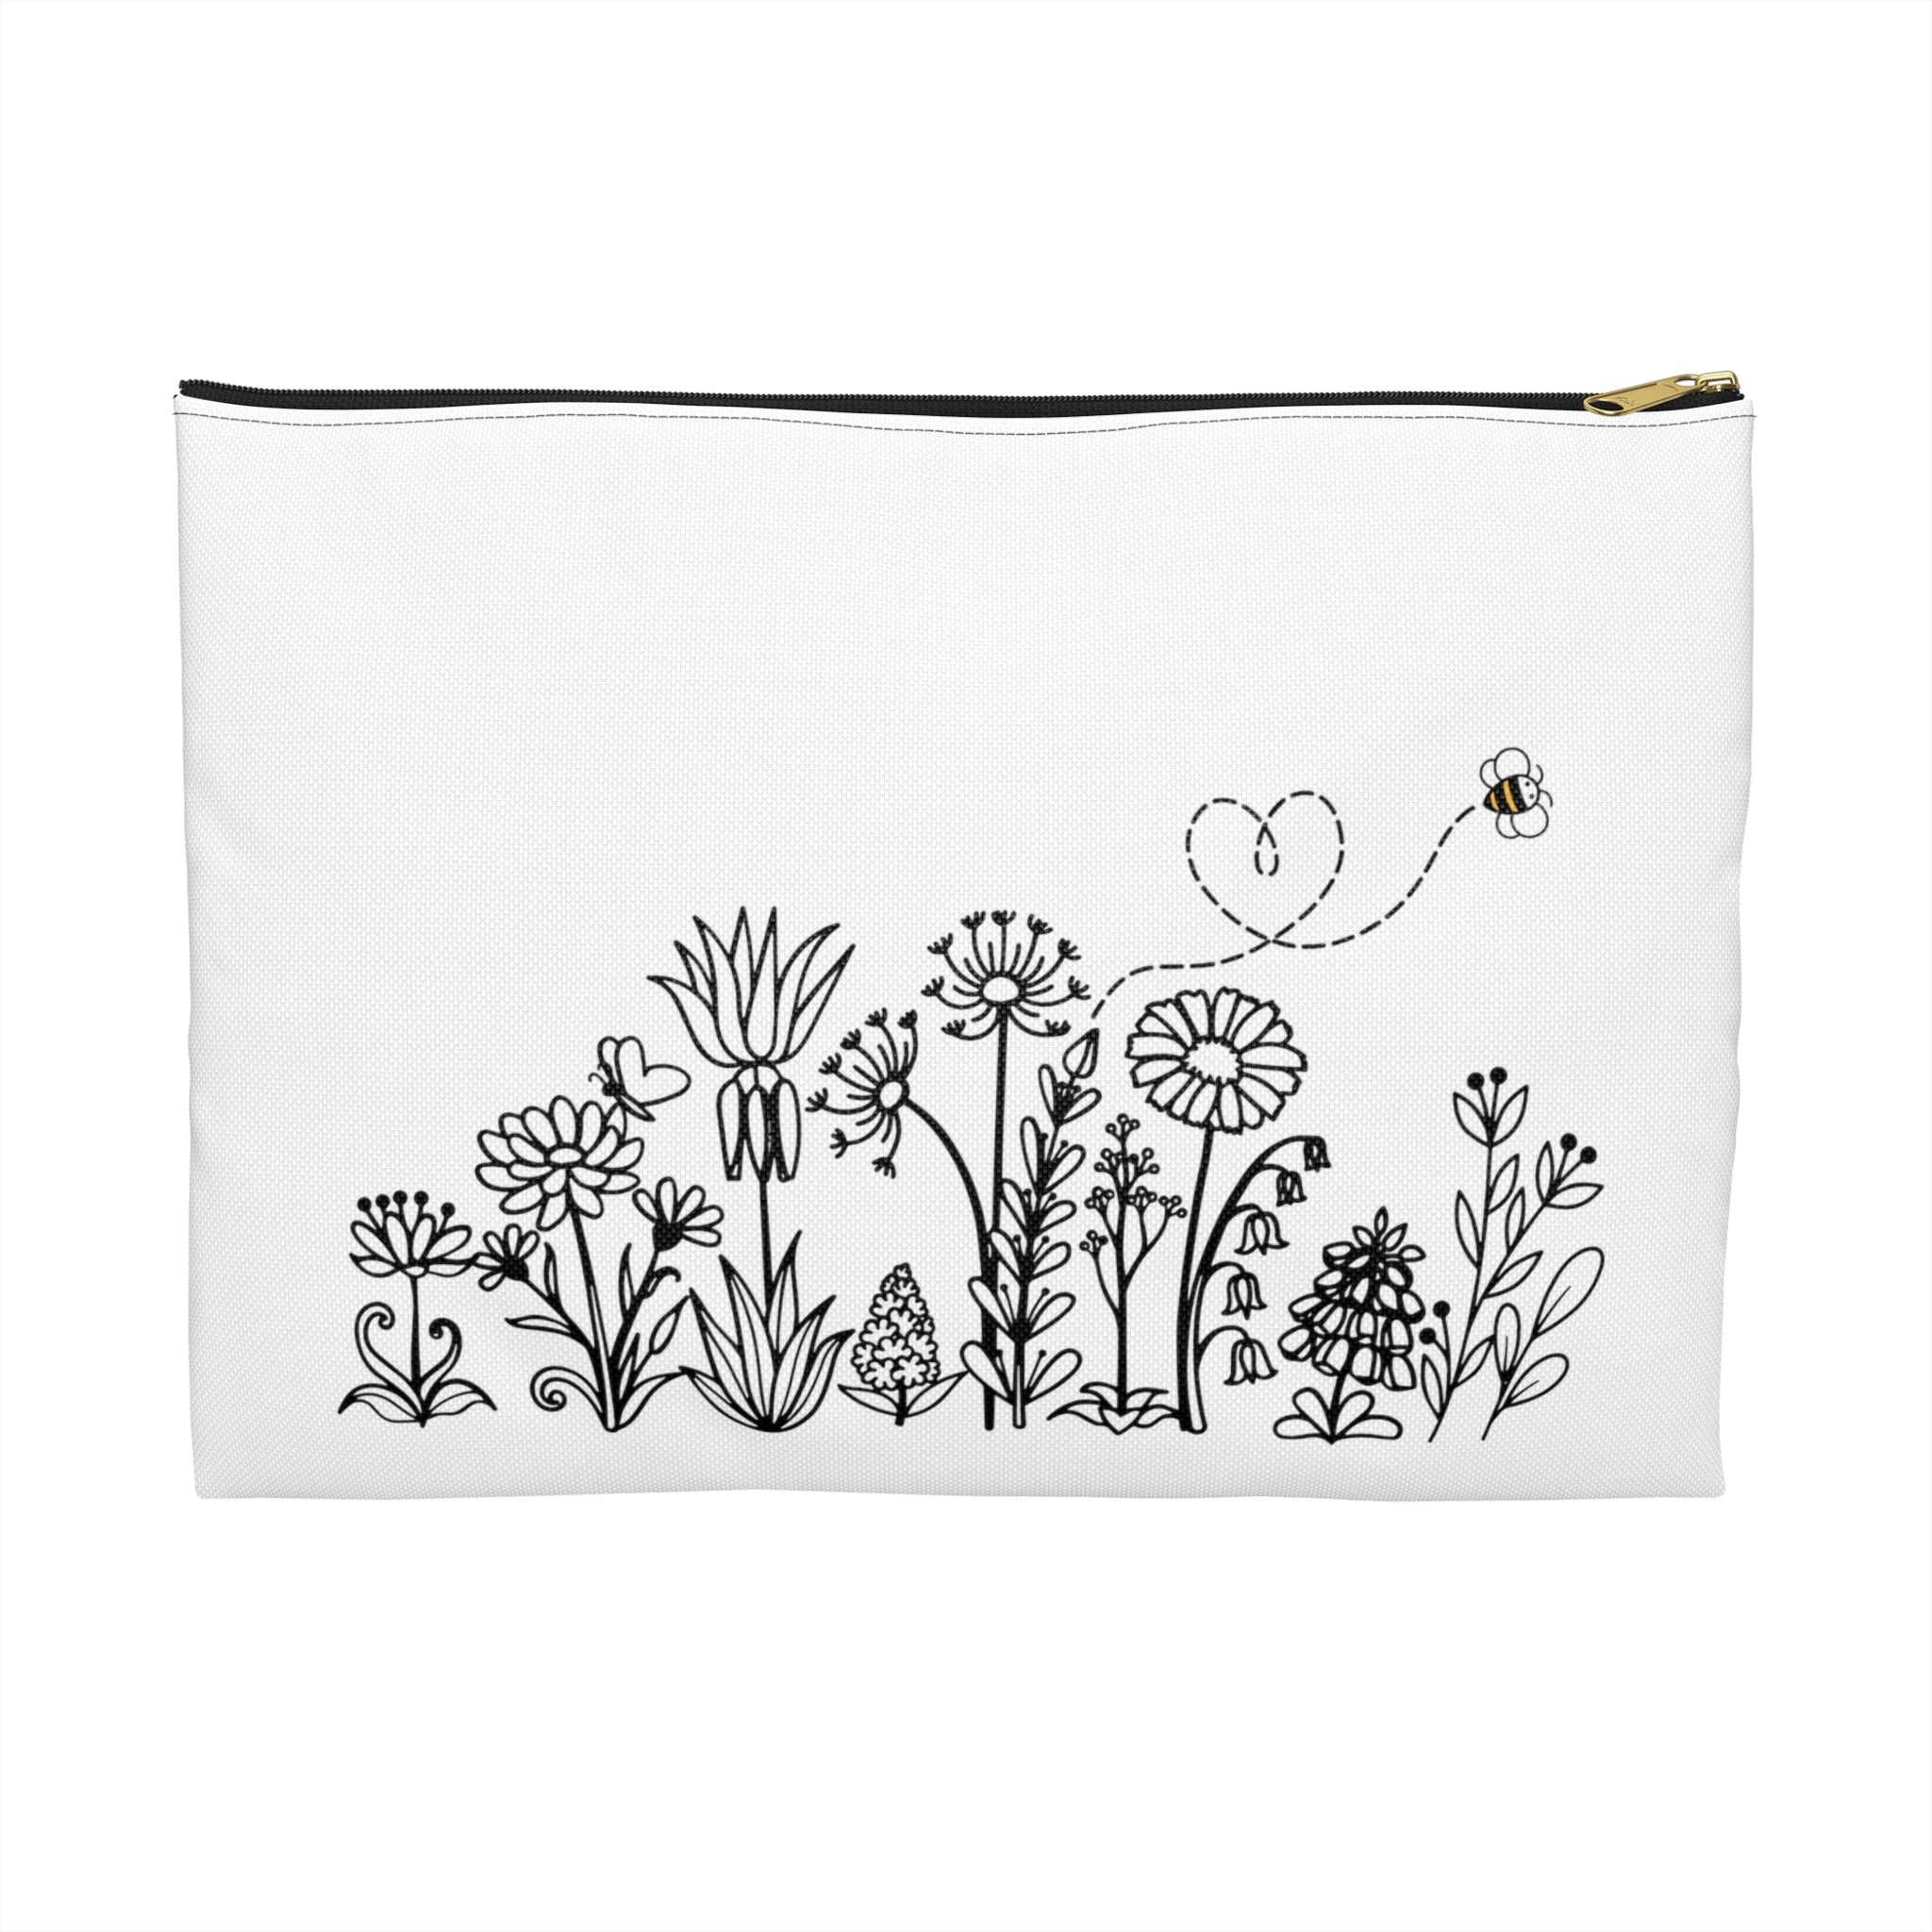 Wildflowers Accessory Pouch